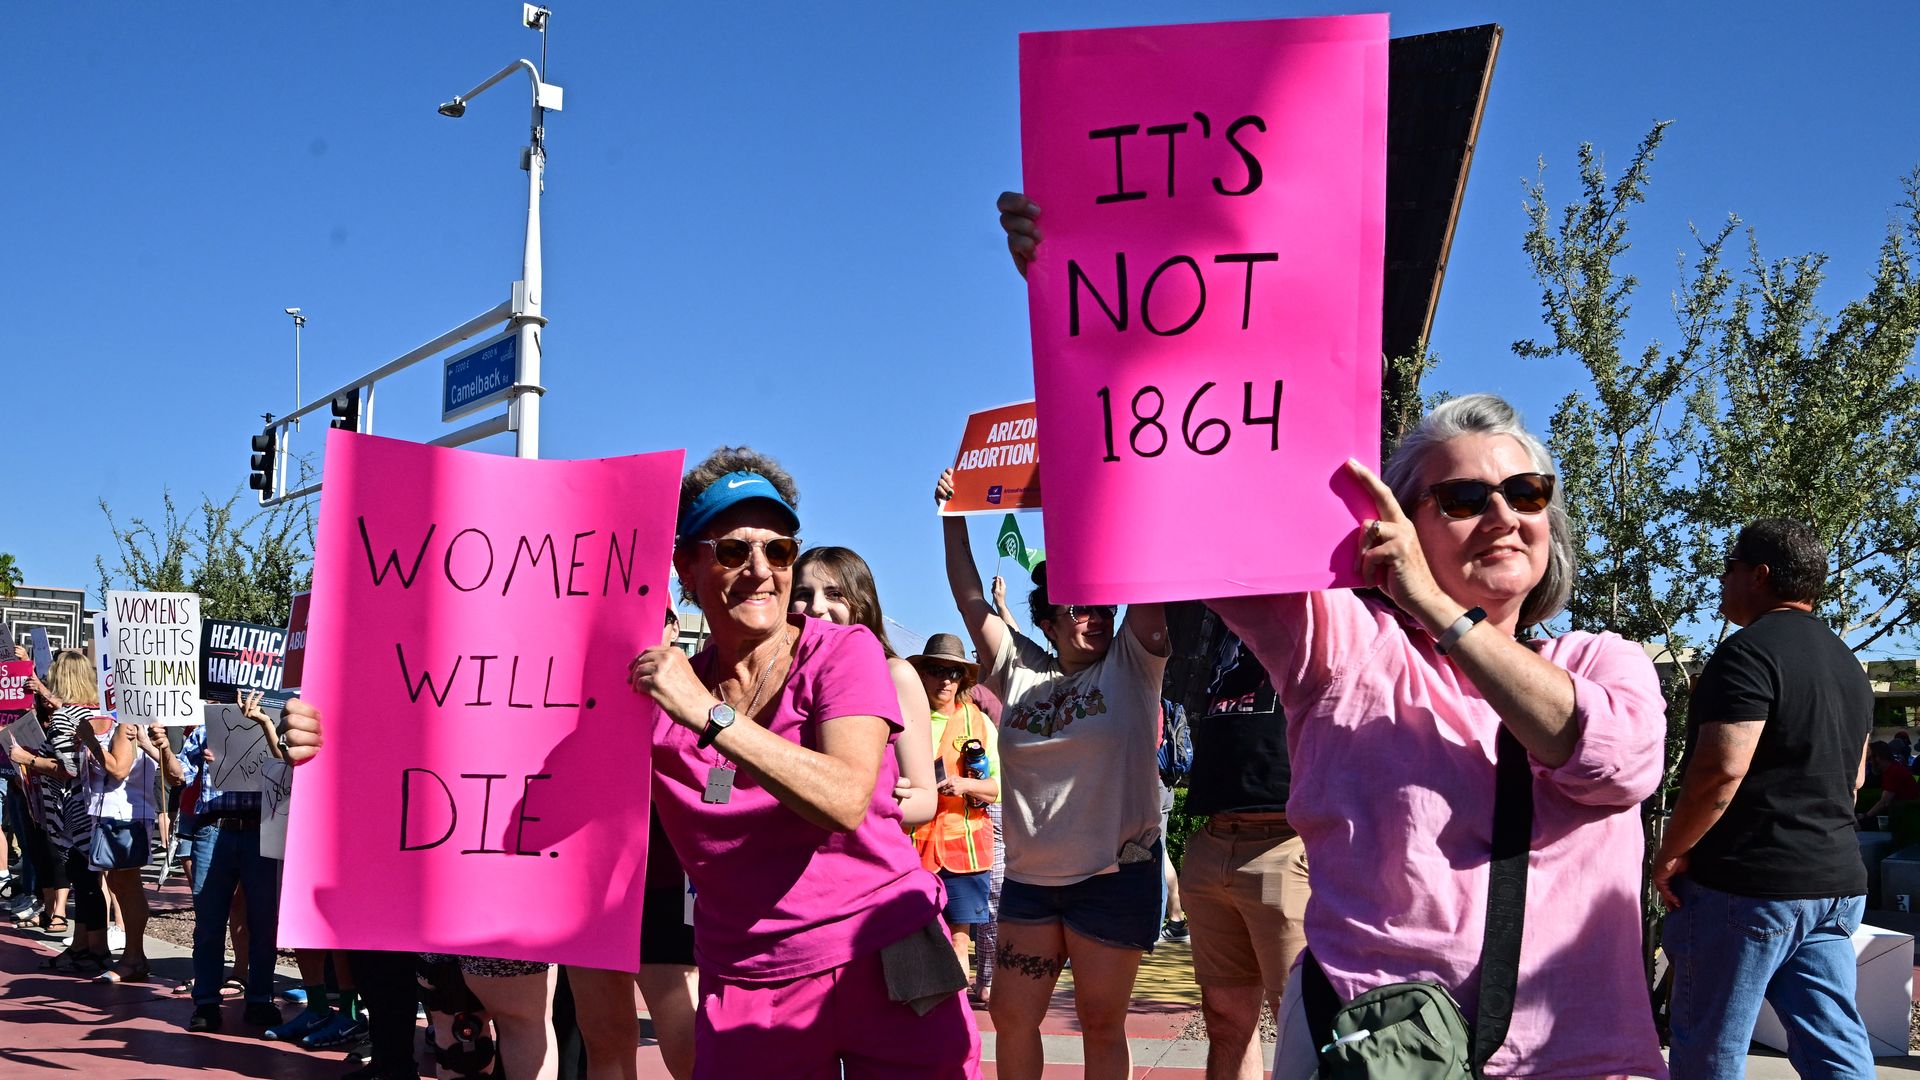 Women holding pink signs that say, "WOMEN WILL DIE" and "IT'S NOT 1864."